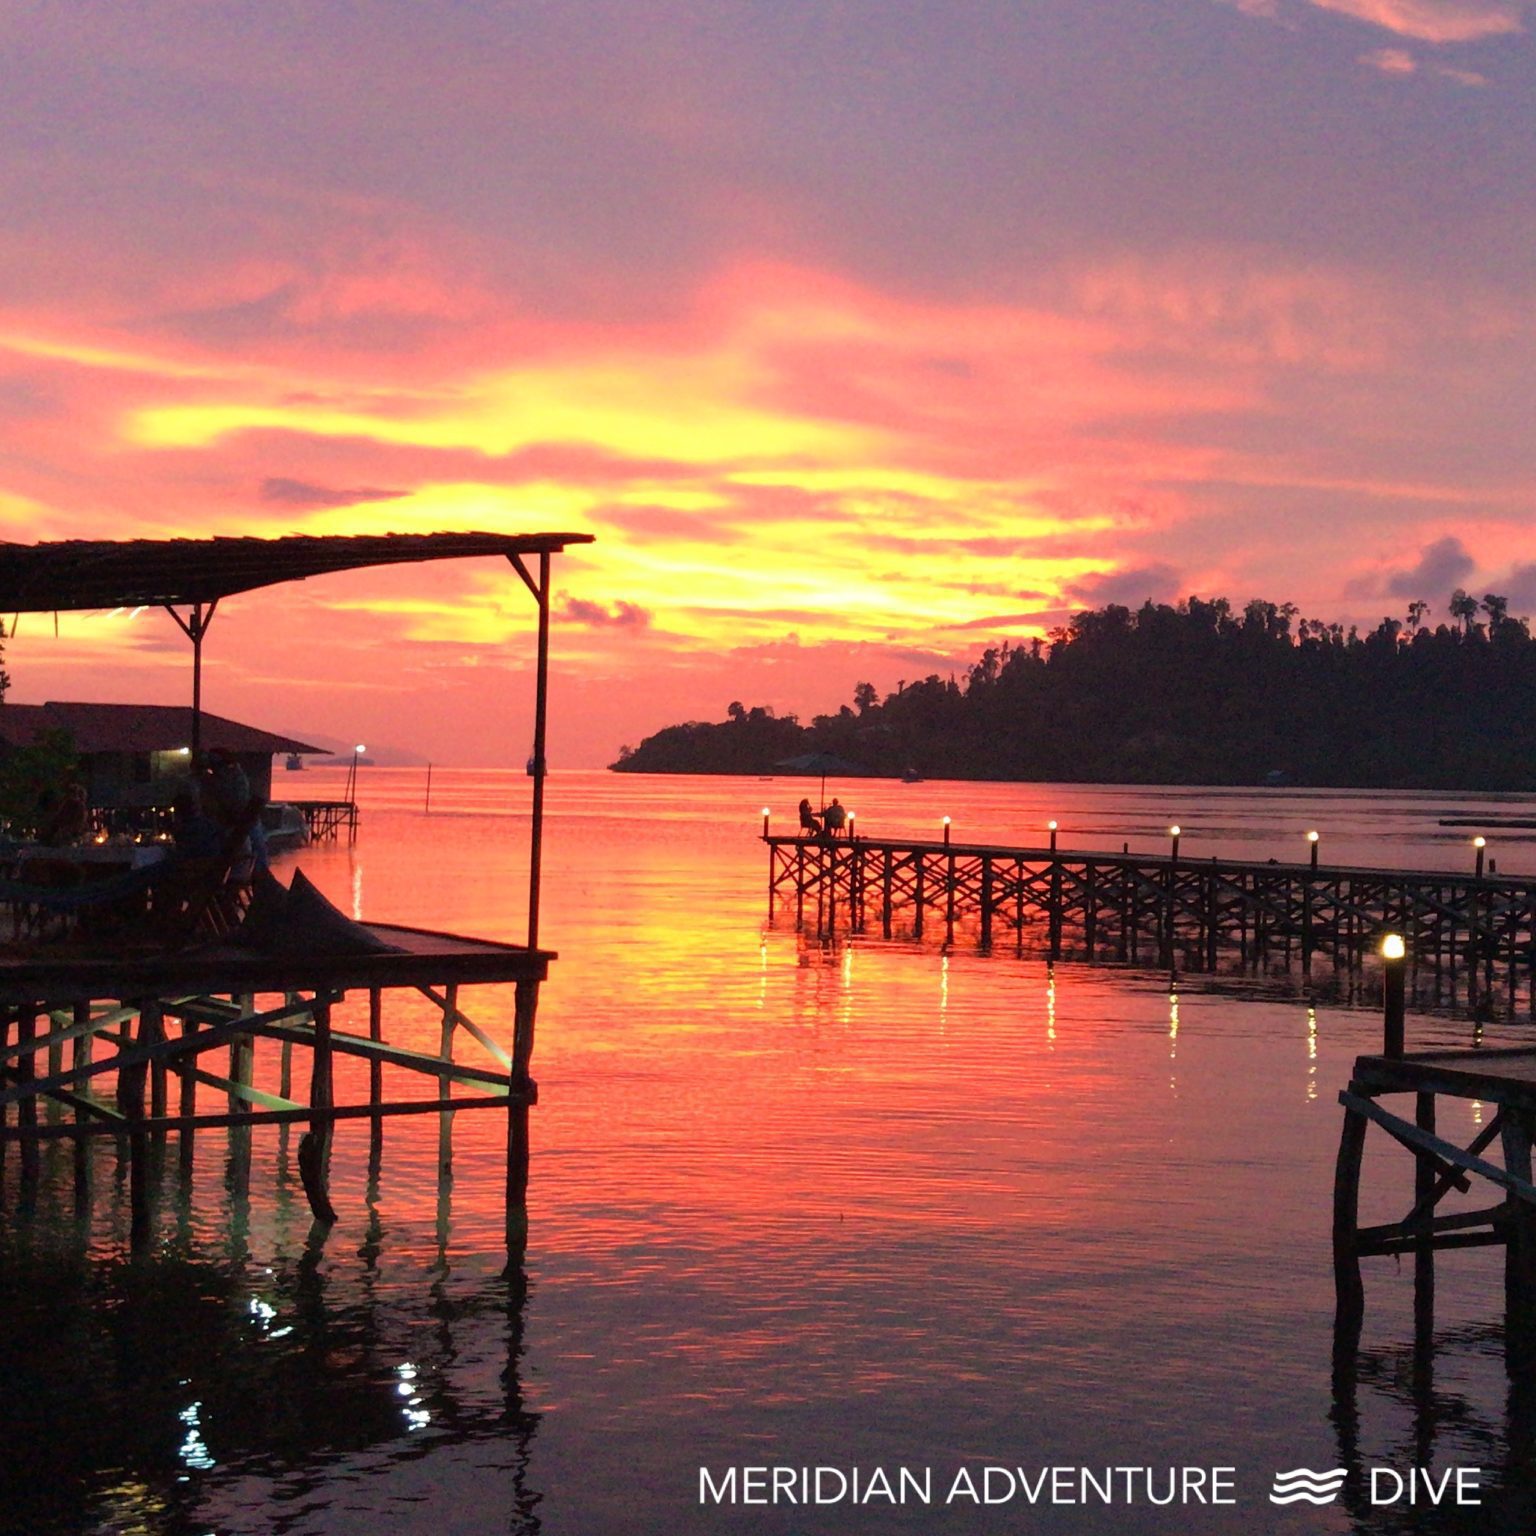 What Makes Meridian Adventure Dive Different